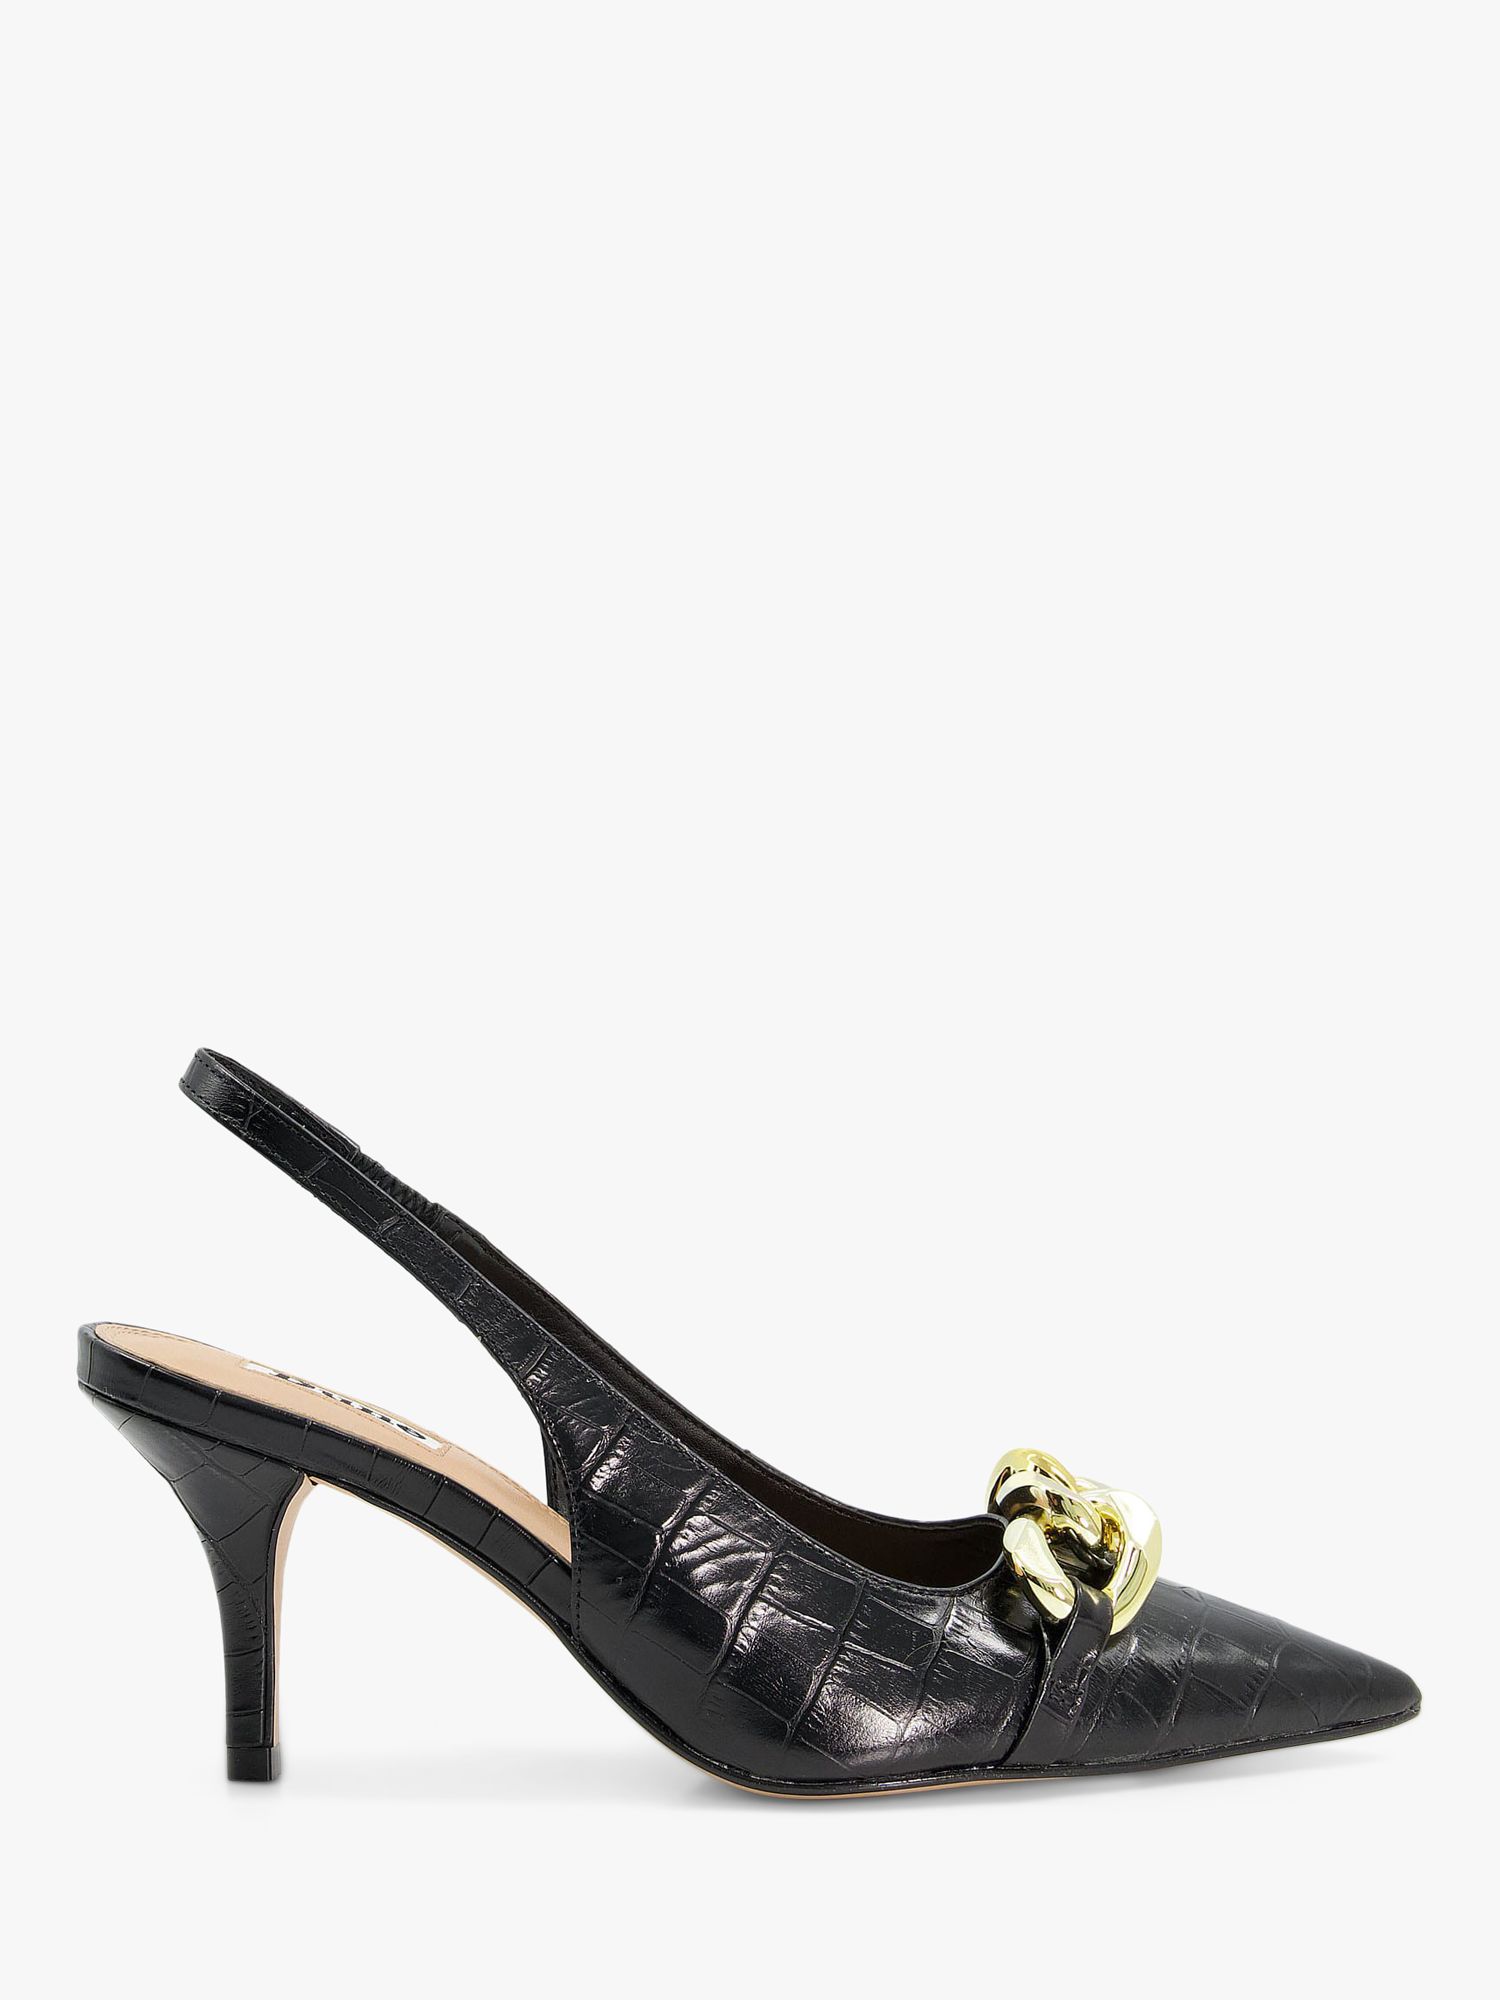 Dune Canary Leather Croc Slingback Court Shoes at John Lewis & Partners